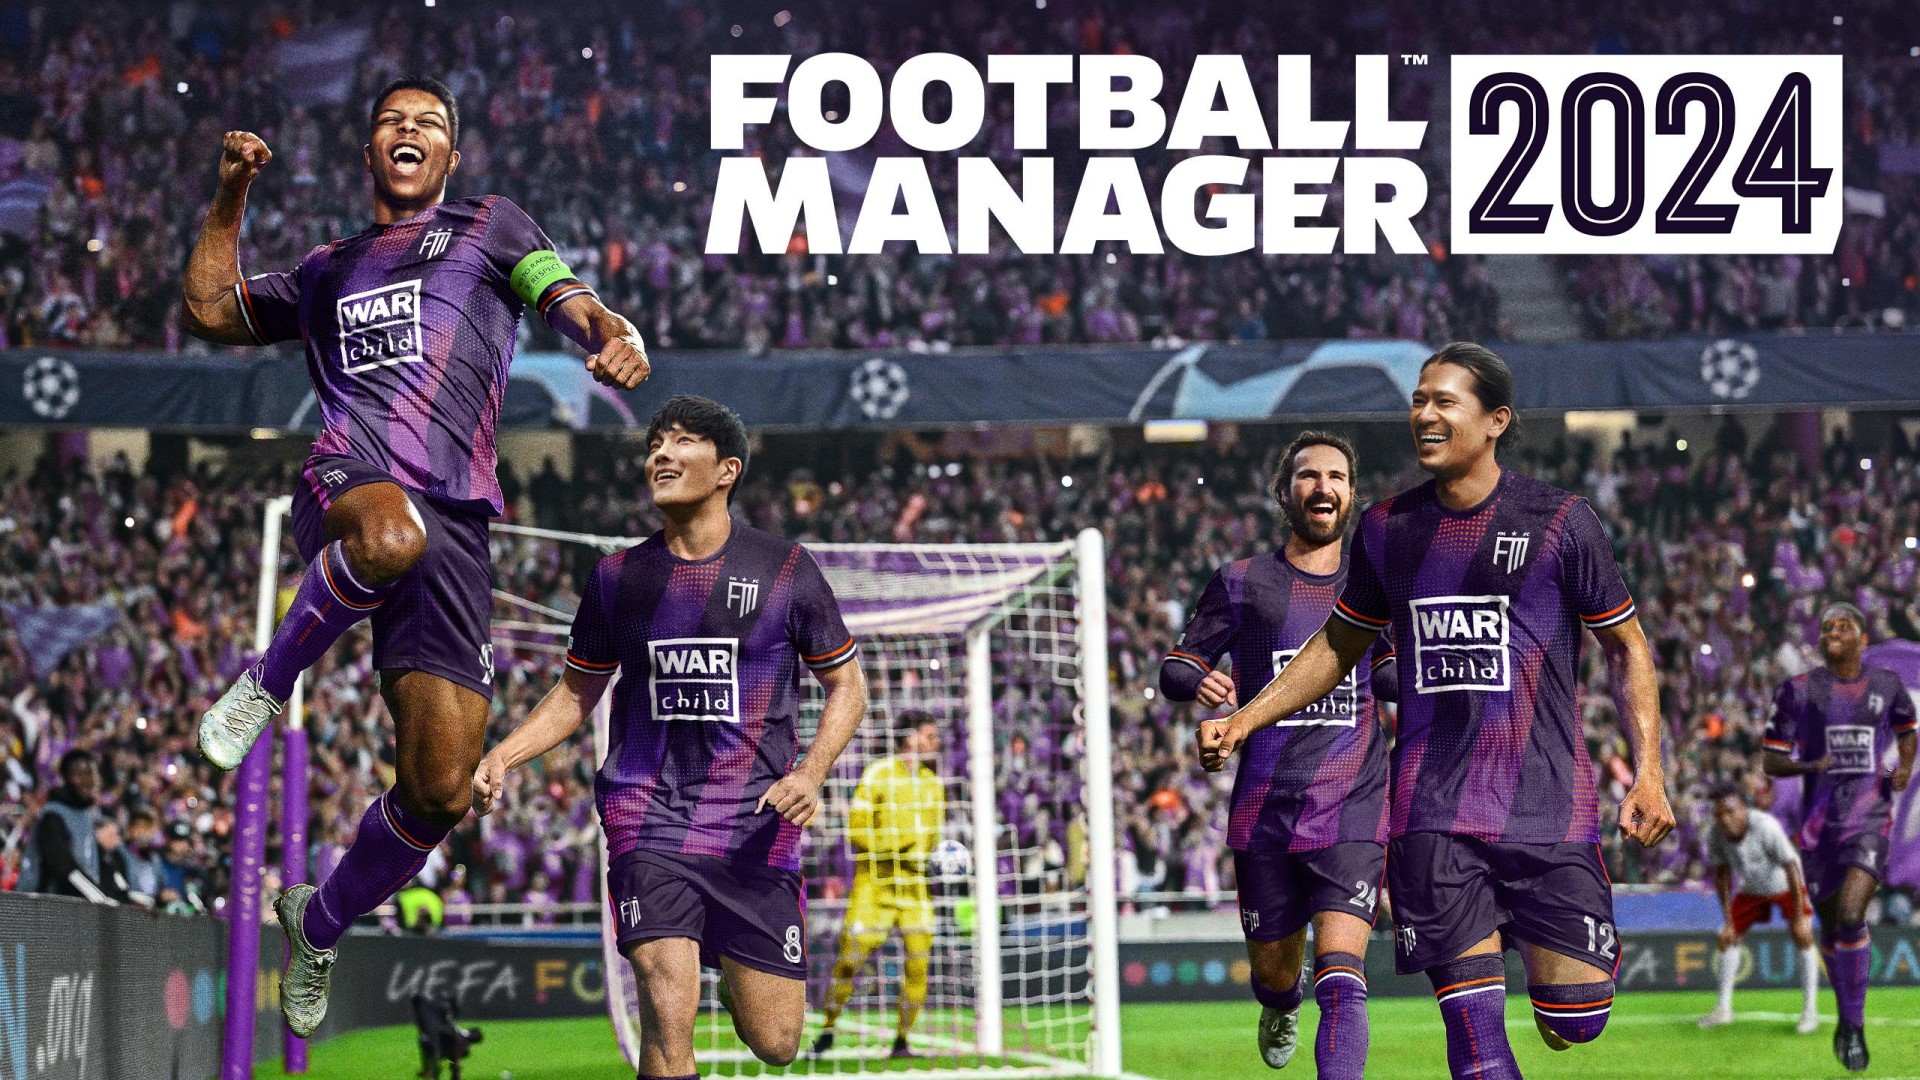 Football Manager 2023 is completely free of charge in September, Gaming, Entertainment